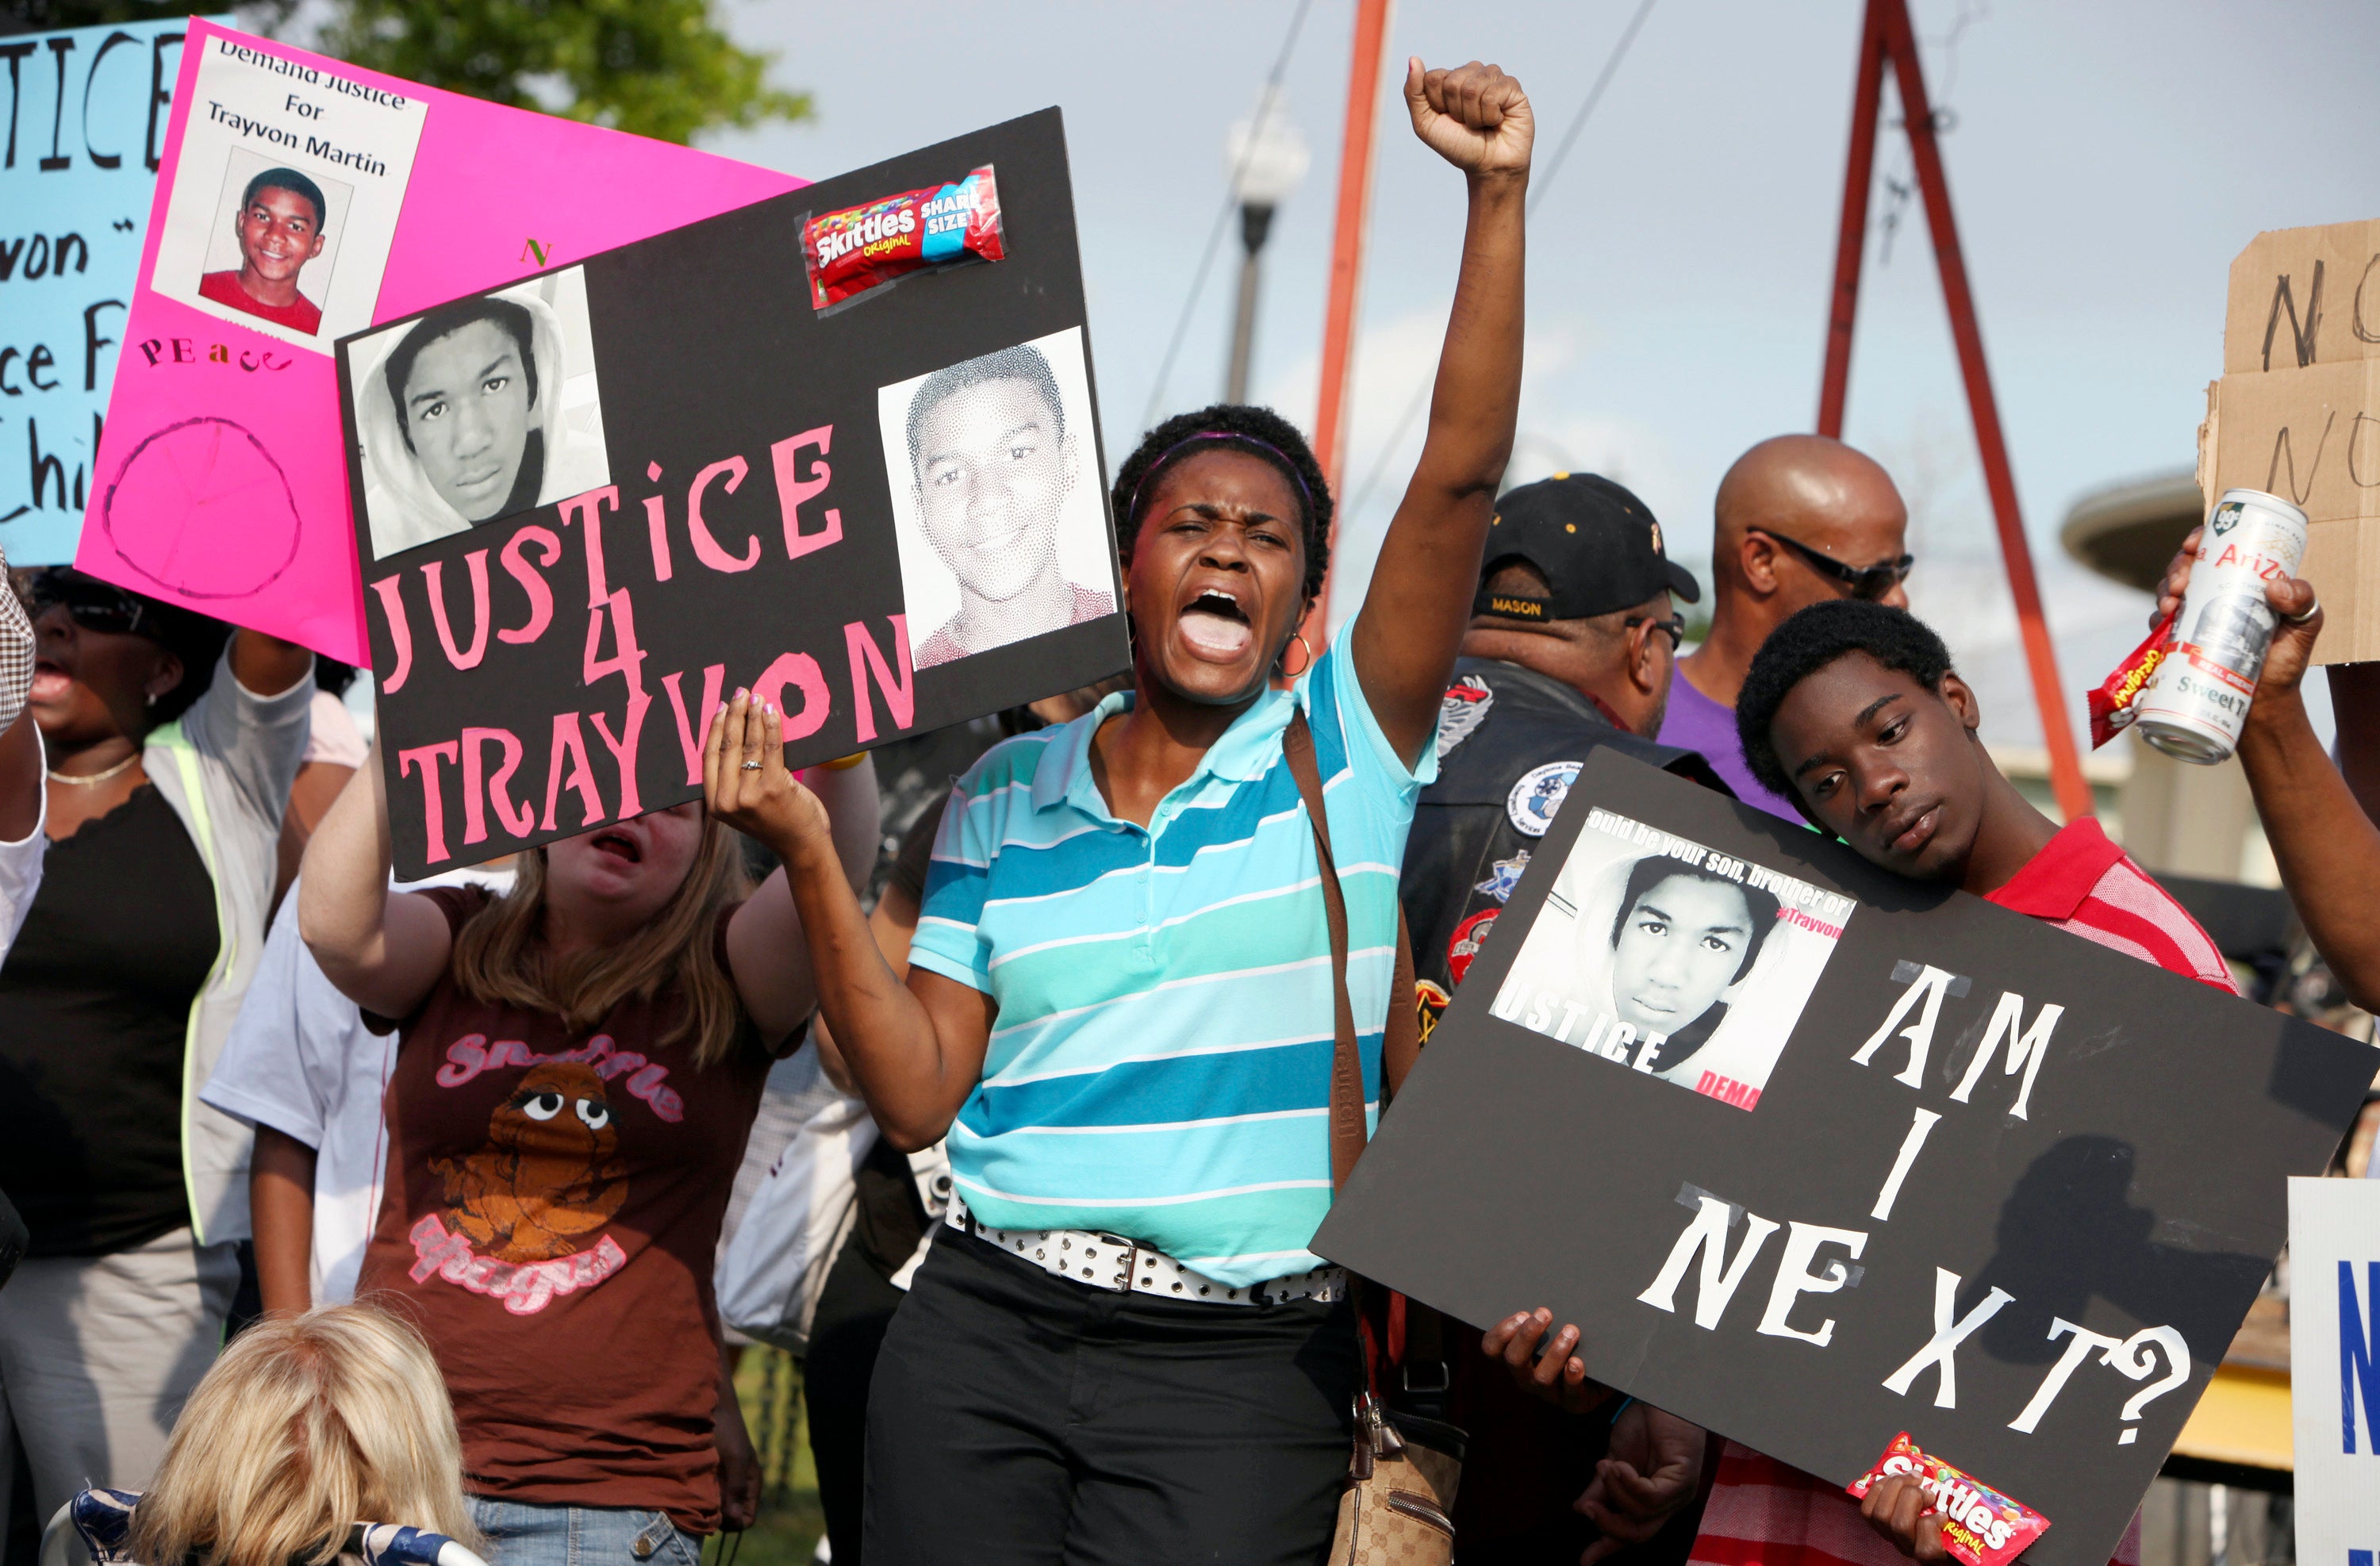 The killer of Trayvon Martin was acquitted in part because of Stand Your Ground laws